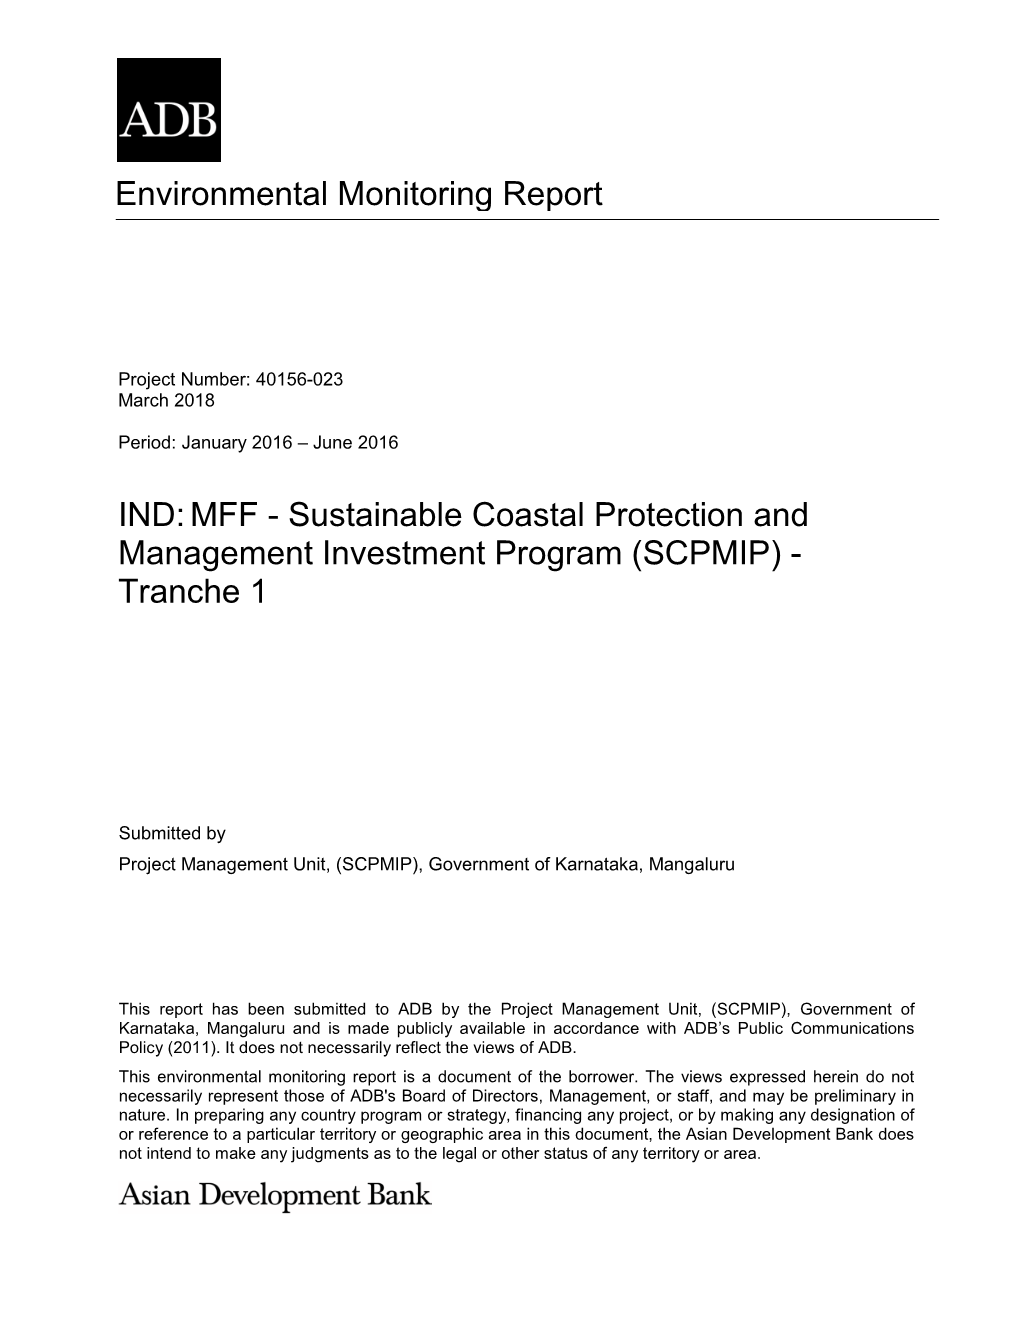 4015-023: Sustainable Coastal Protection and Management